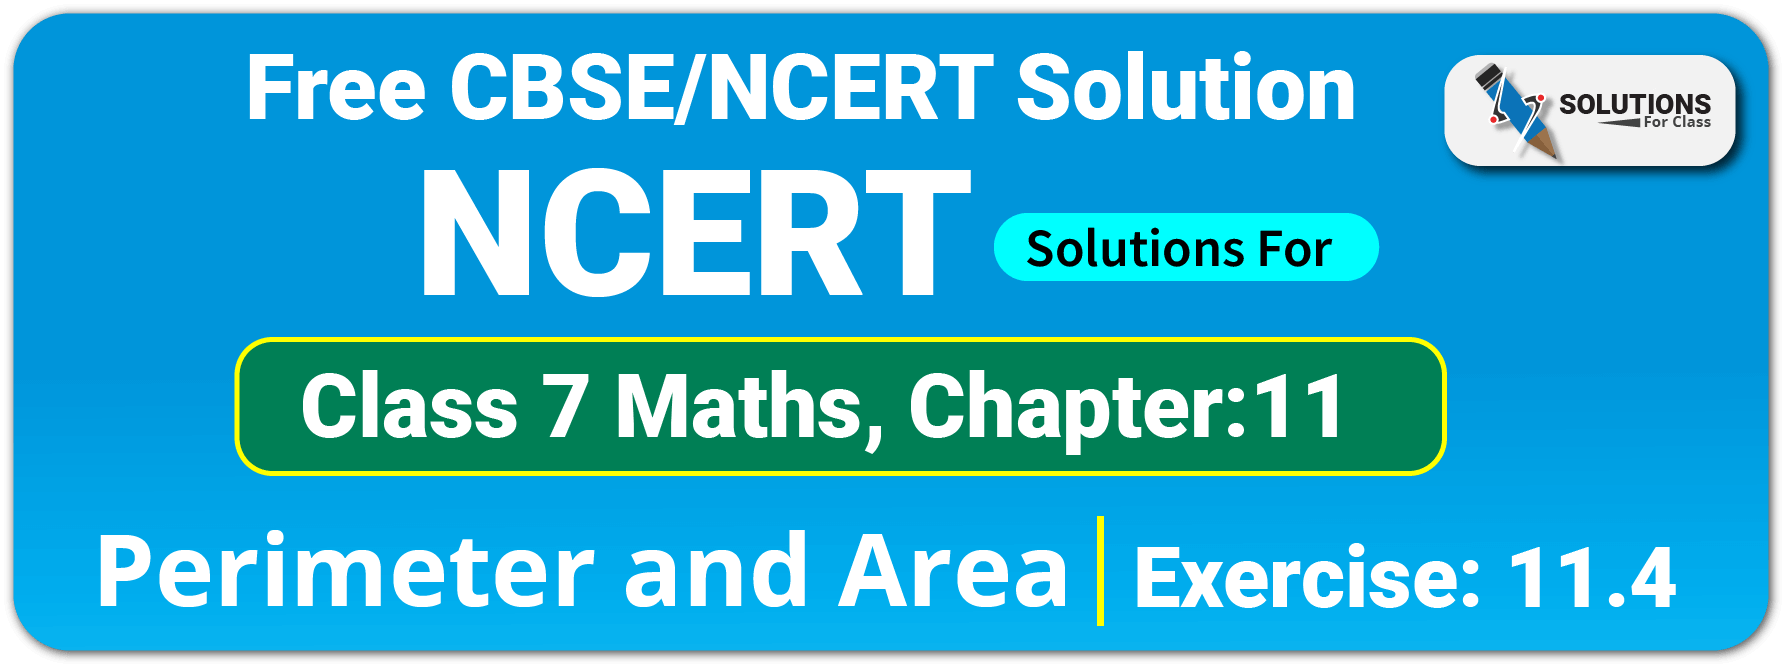 NCERT Solutions For Class 7 Maths Chapter 11 Perimeter and Area Exercise 11.4